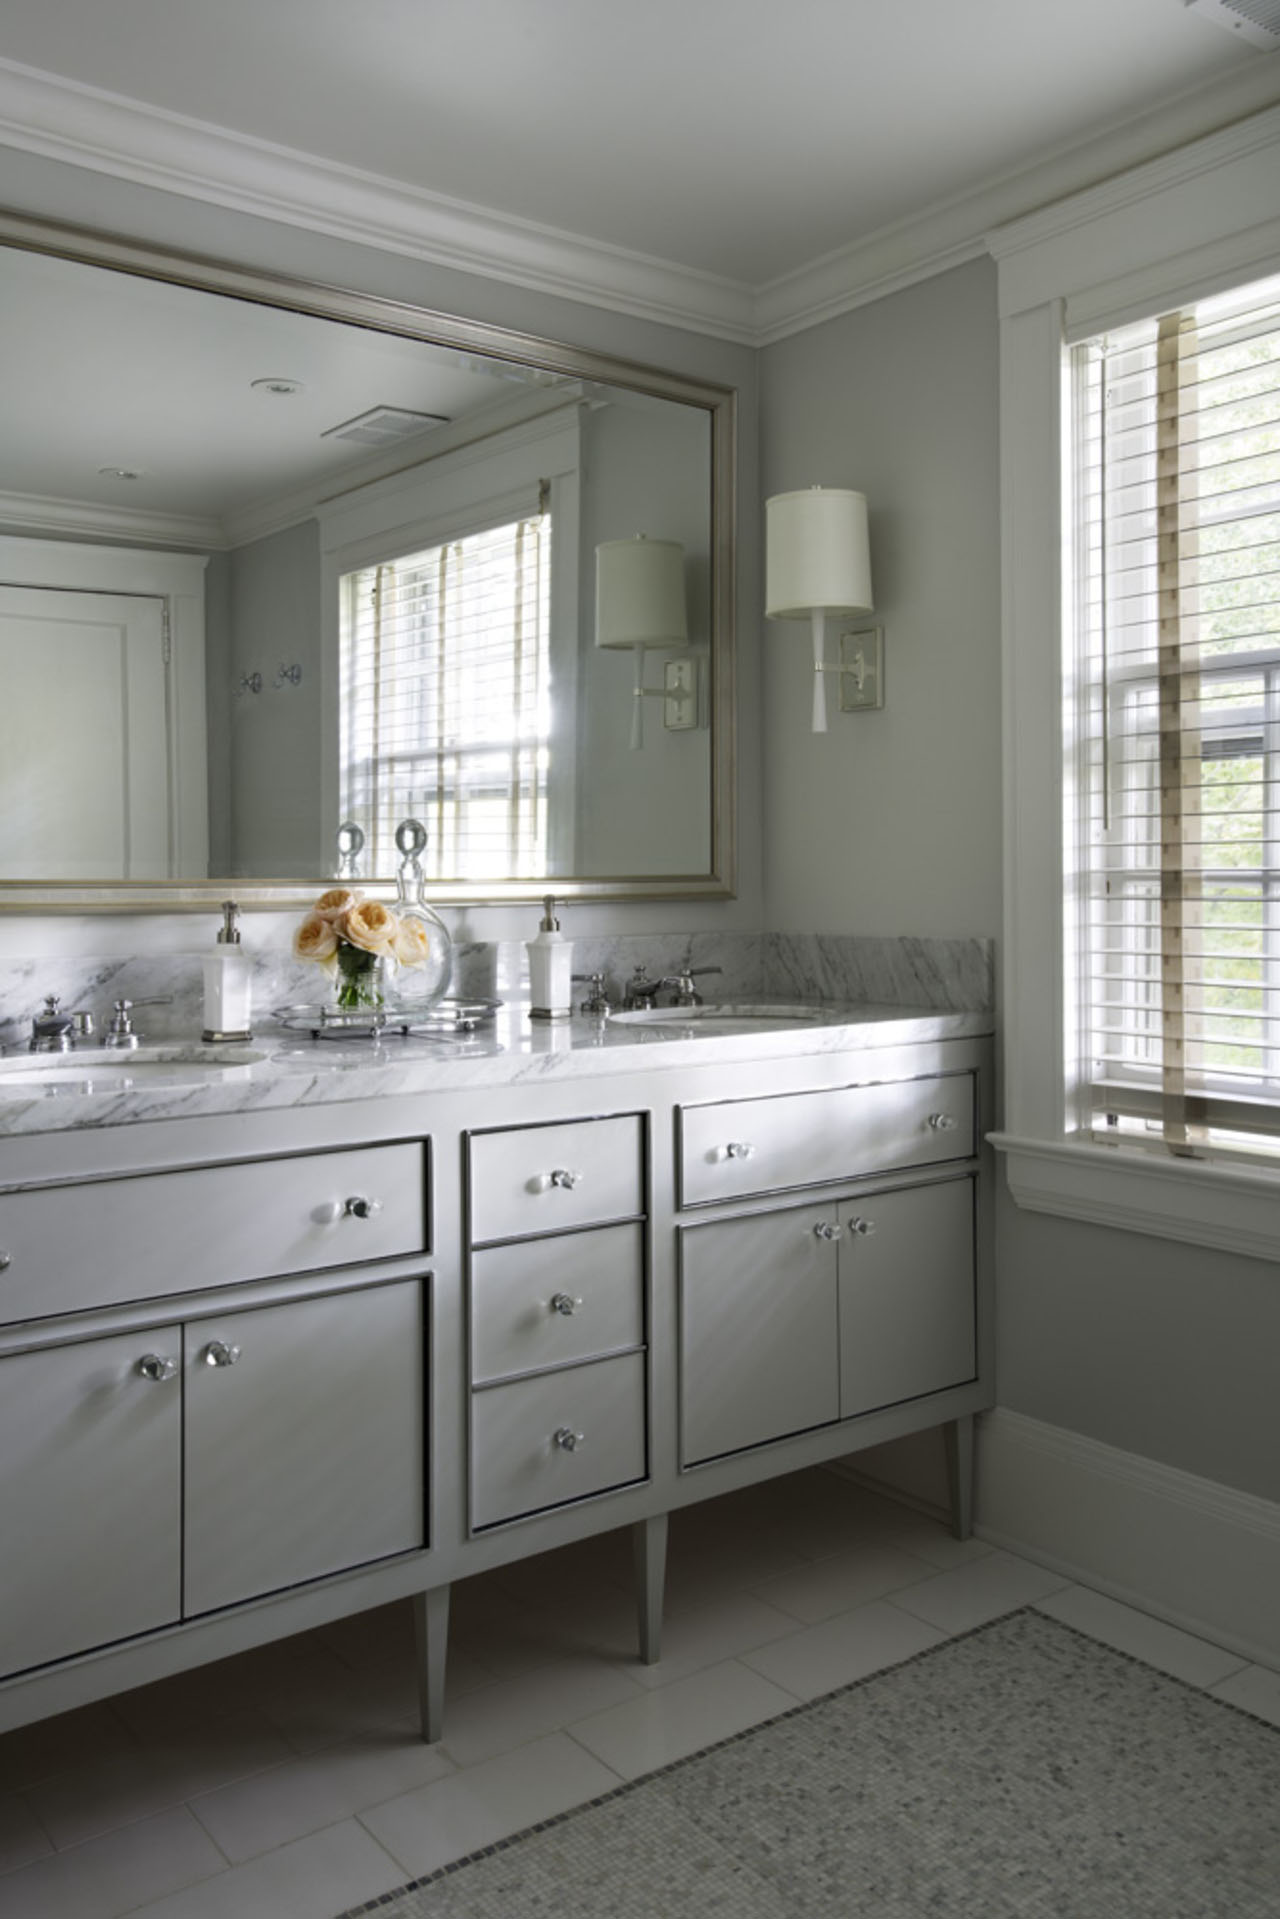 Avon Road Bhdm Stylish Avon Road Residence By BHDM Master Bathroom Idea Involving Double Grey Vanity With Framed Mirror  Classic Living Room Style For The Stylish Home Appearance